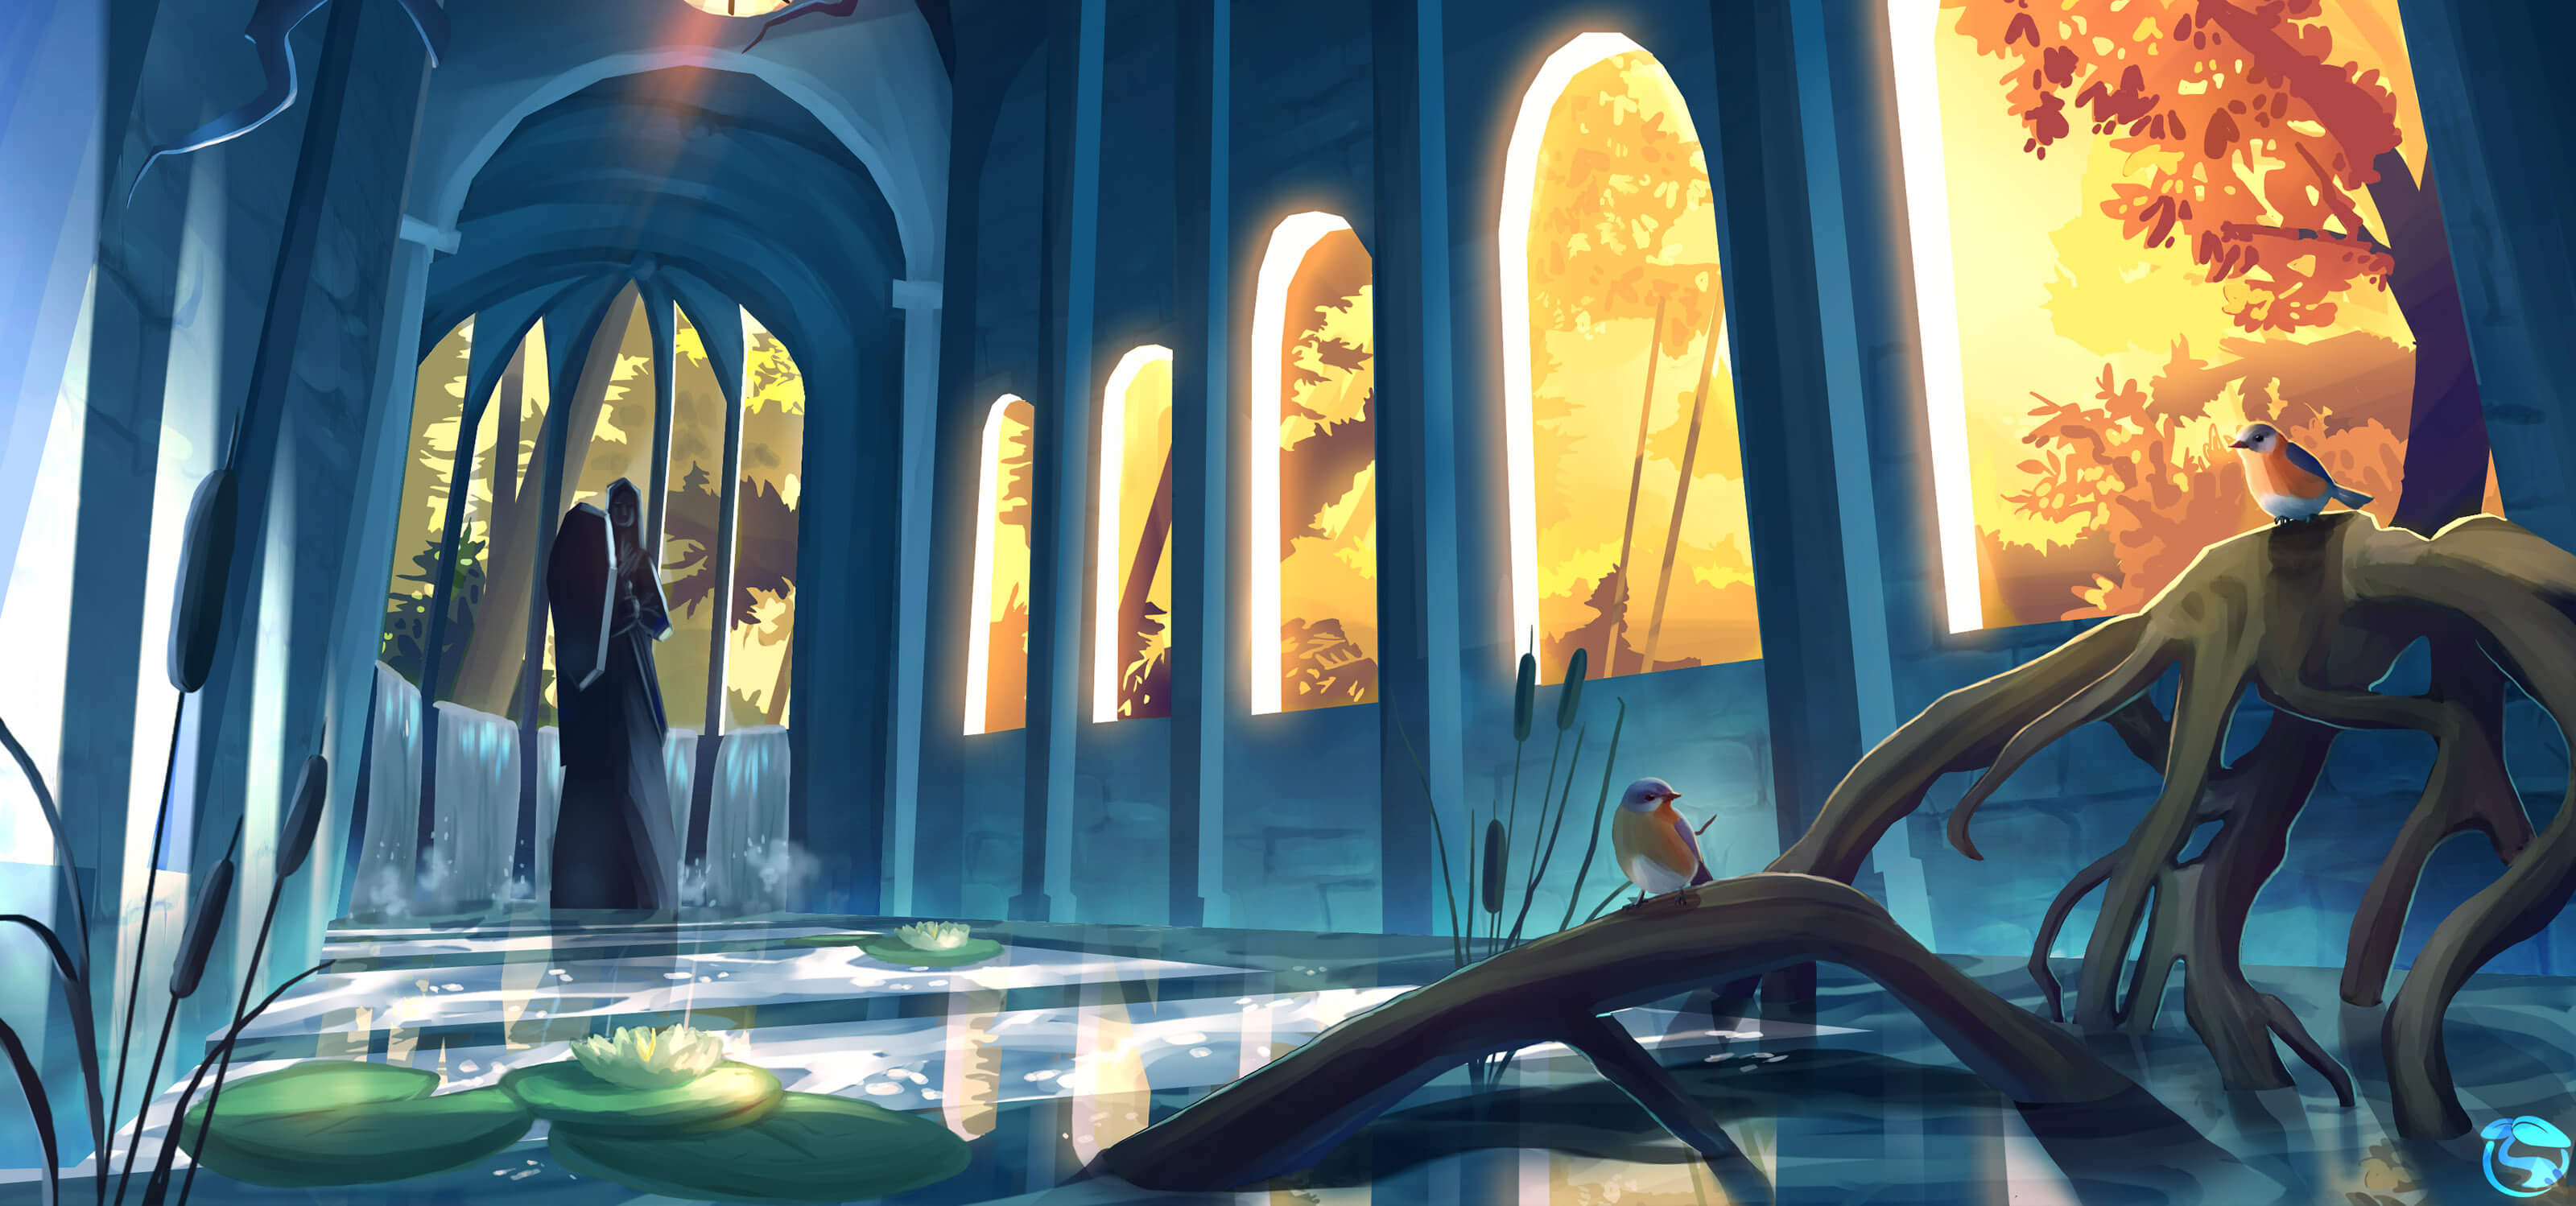 Digital painting of a statue in an open building at sunset, with a pond, lily pads and birds in the foreground